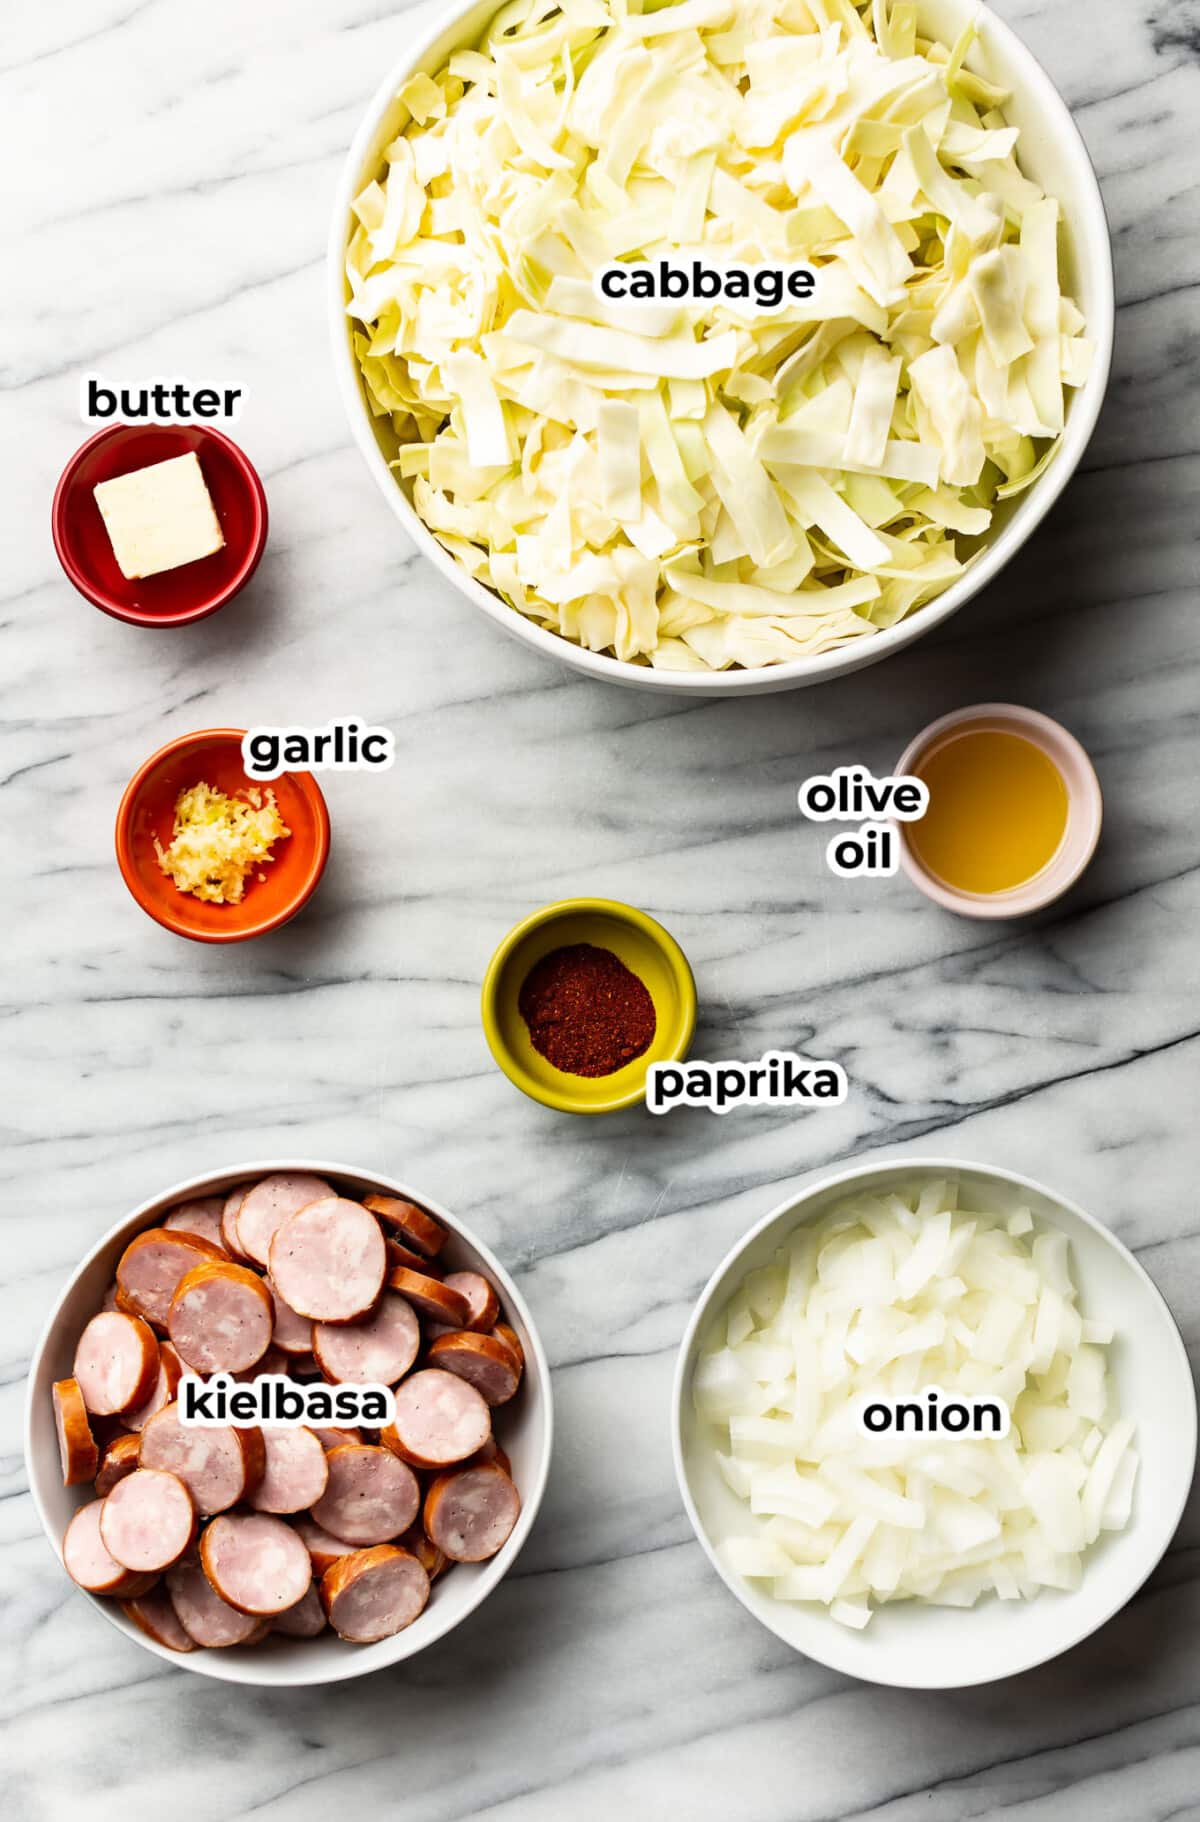 ingredients for sauteed cabbage and kielbasa